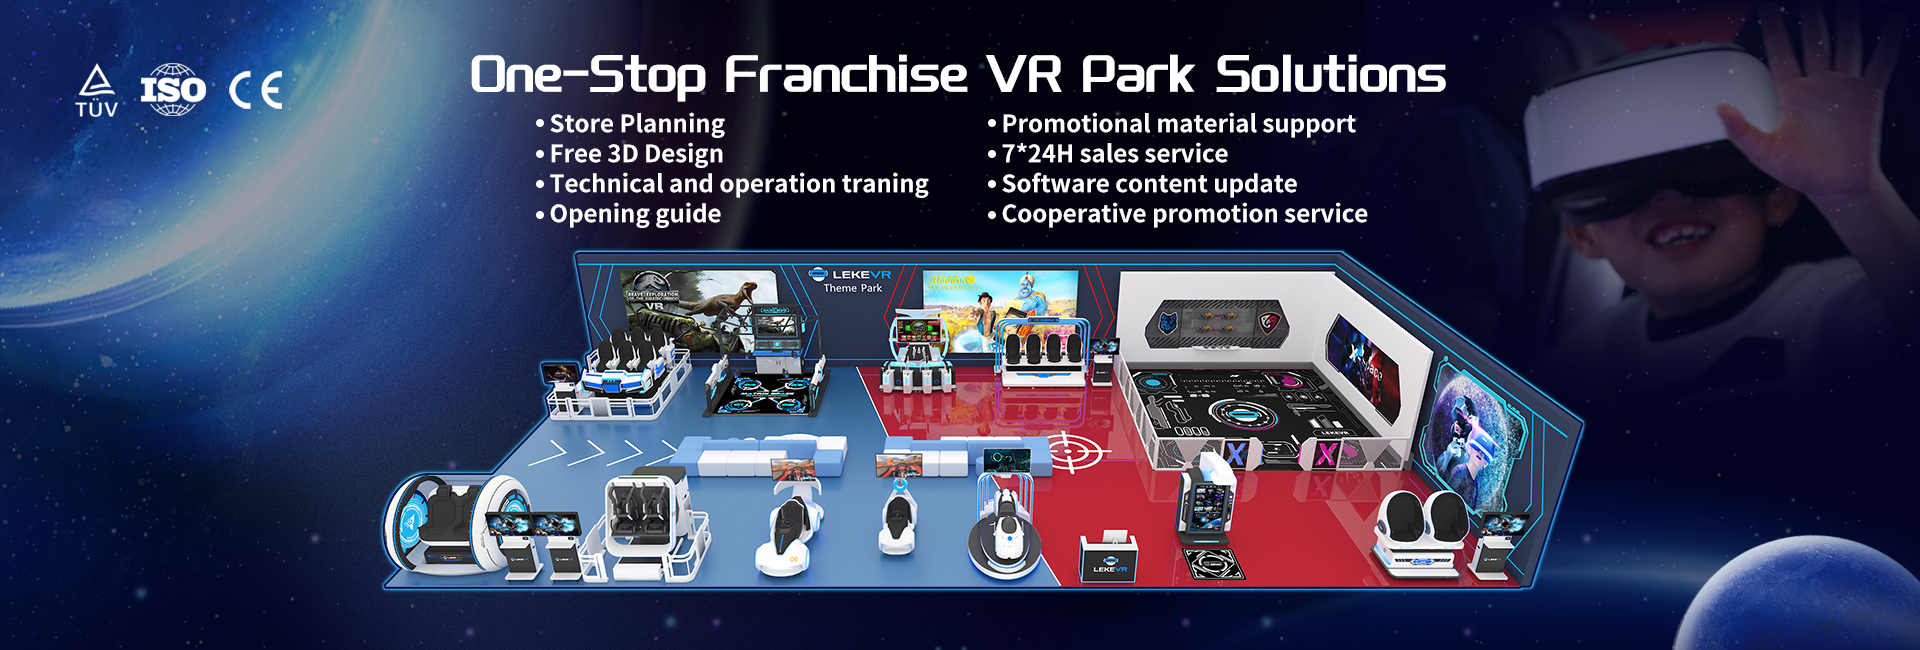 One-Stop Franchise VR Park Solutions 